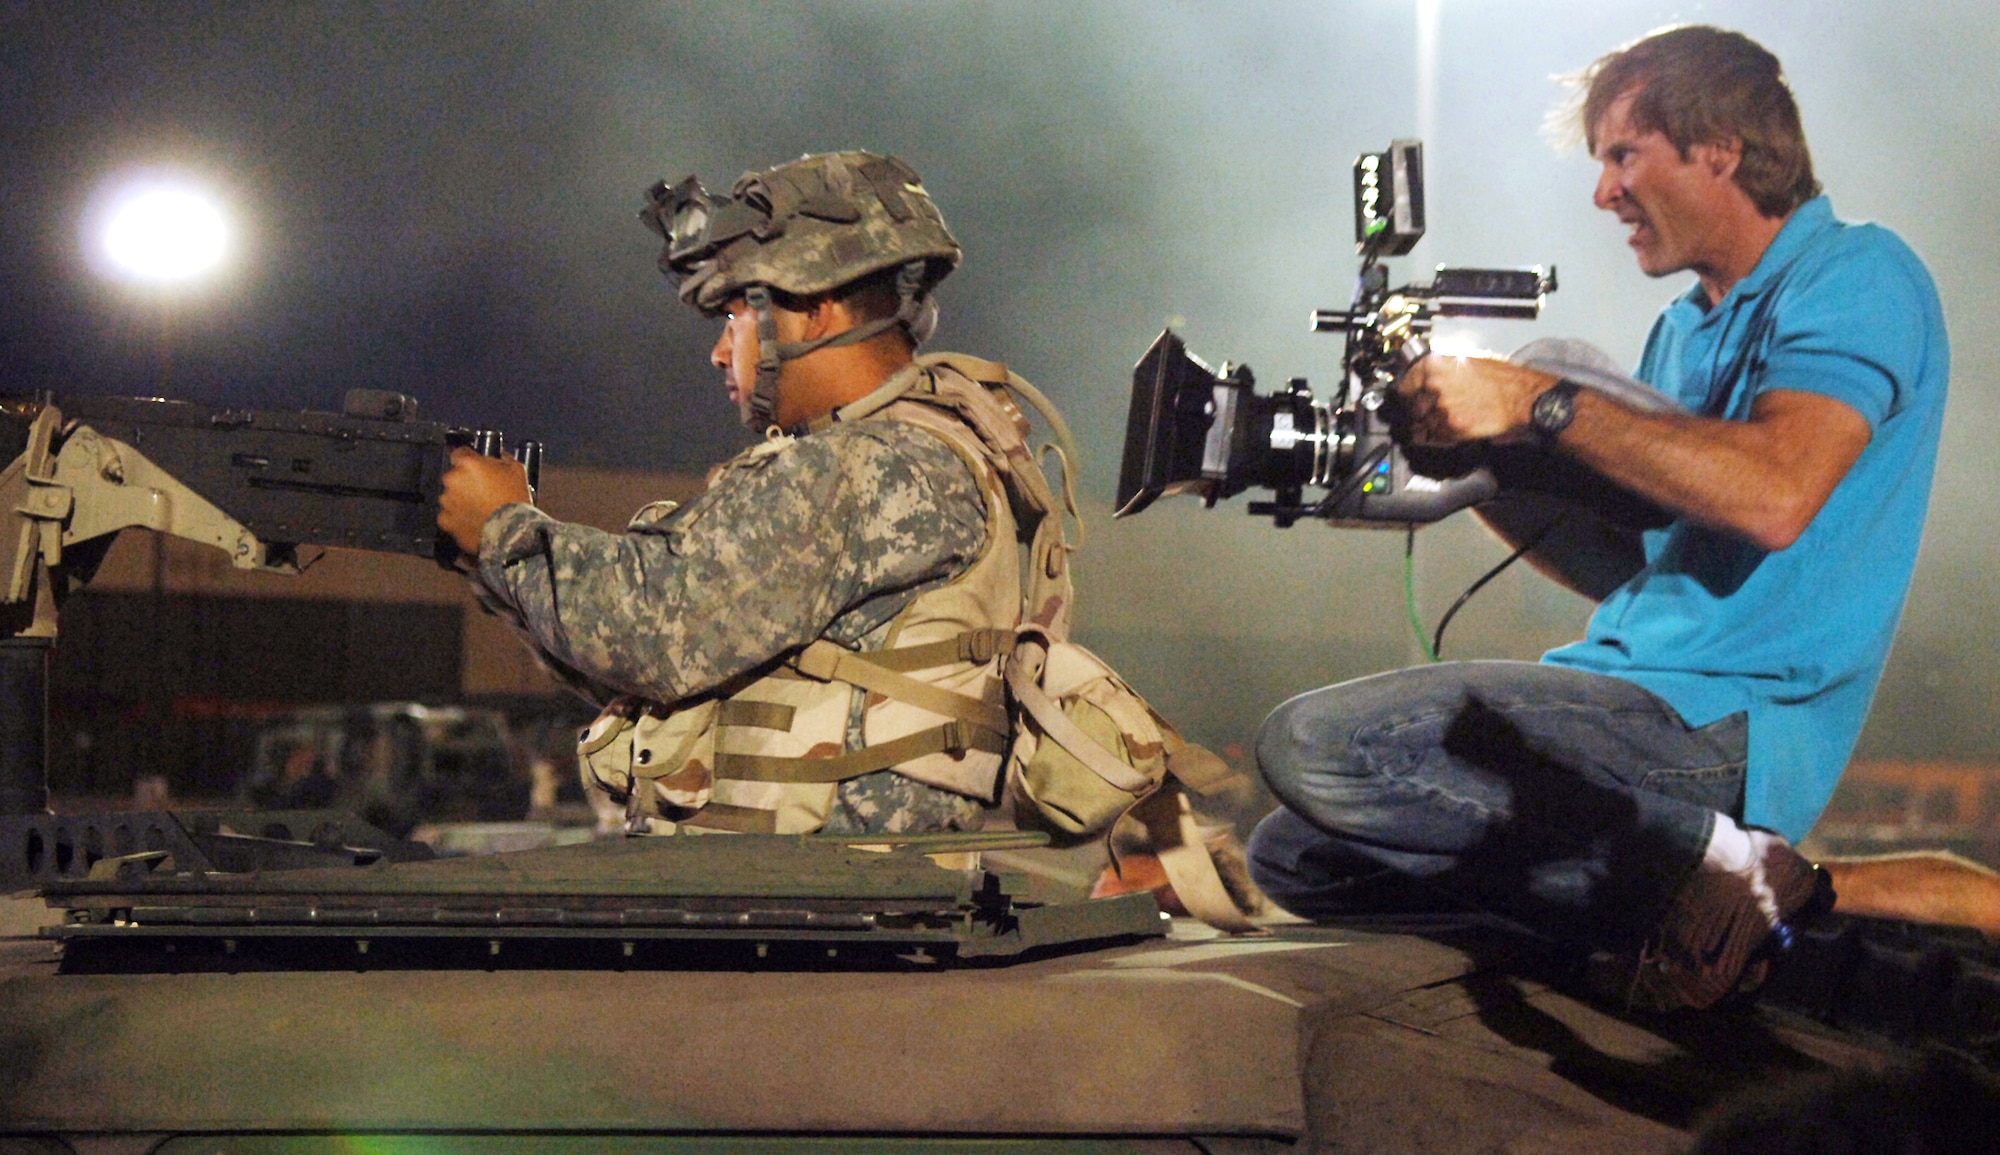 Movie director Michael Bay films an Airman on the set of the movie "Transformers" at Holloman Air Force Base, N.M., on May 30. Several Airmen filled roles as movie extras. The movie is scheduled for release in July 2007. (U.S. Air Force photo/Tech. Sgt. Larry A. Simmons)
